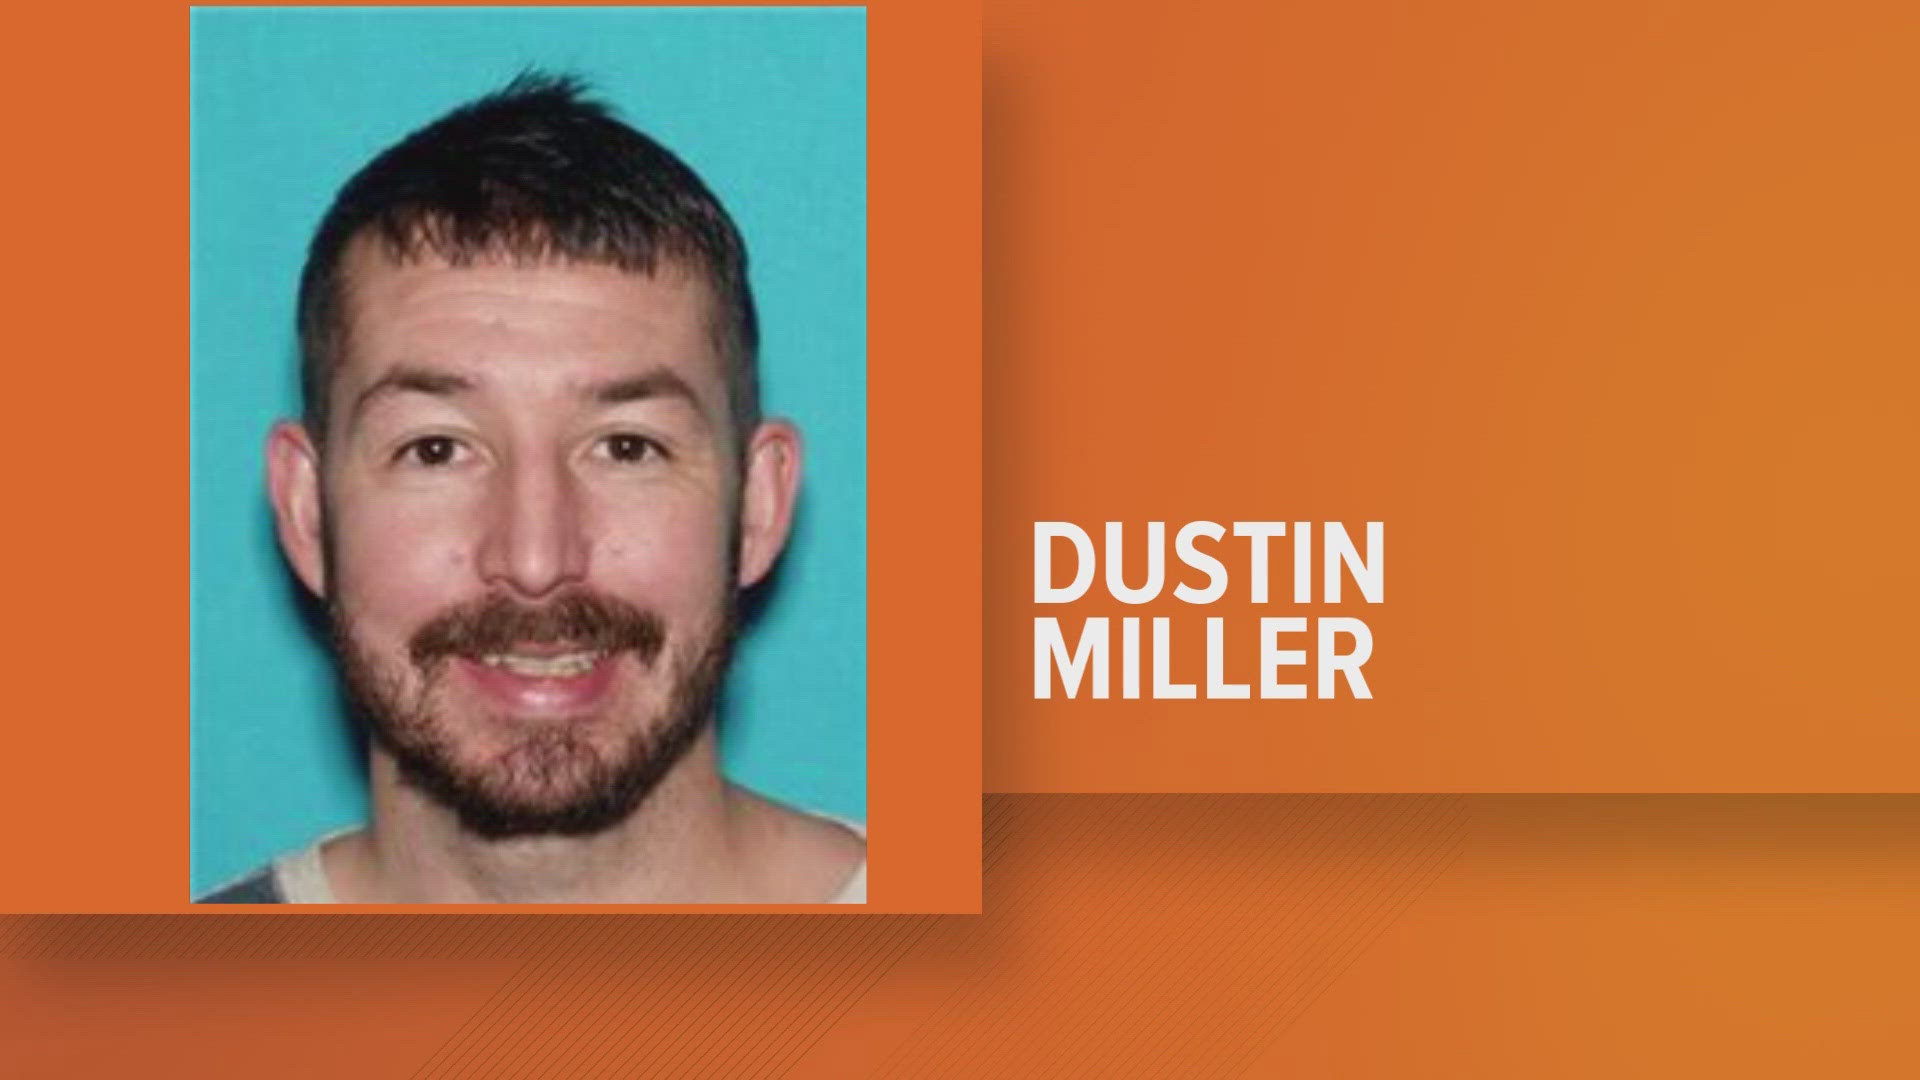 Hamblen County deputies said Dustin Bradley Miller has active warrants for sexual abuse of a child, statutory rape by an authority figure and more.